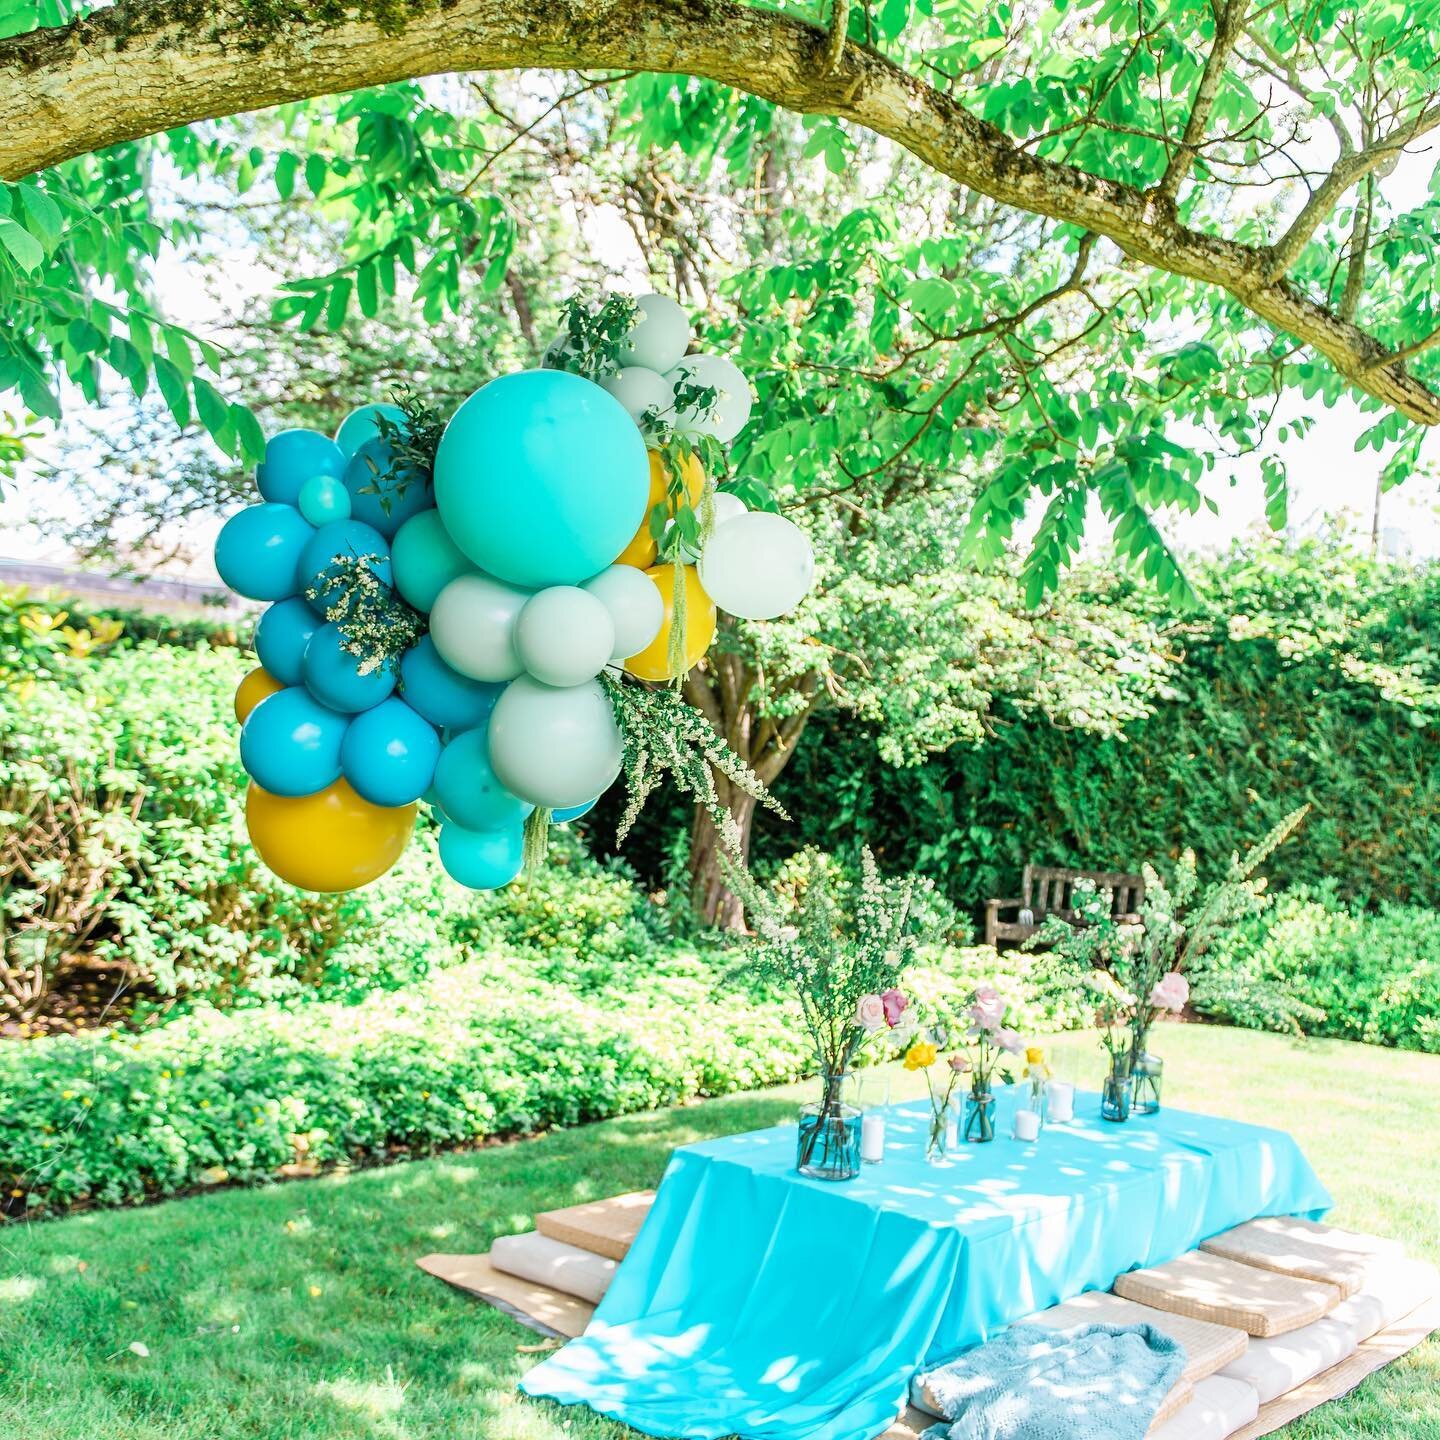 A super fun picnic with our balloon chandelier! We&rsquo;re so happy and grateful our clients trust us and let us create beautiful installations for their special events! 💙💜💙 Photo by @lestellephotography